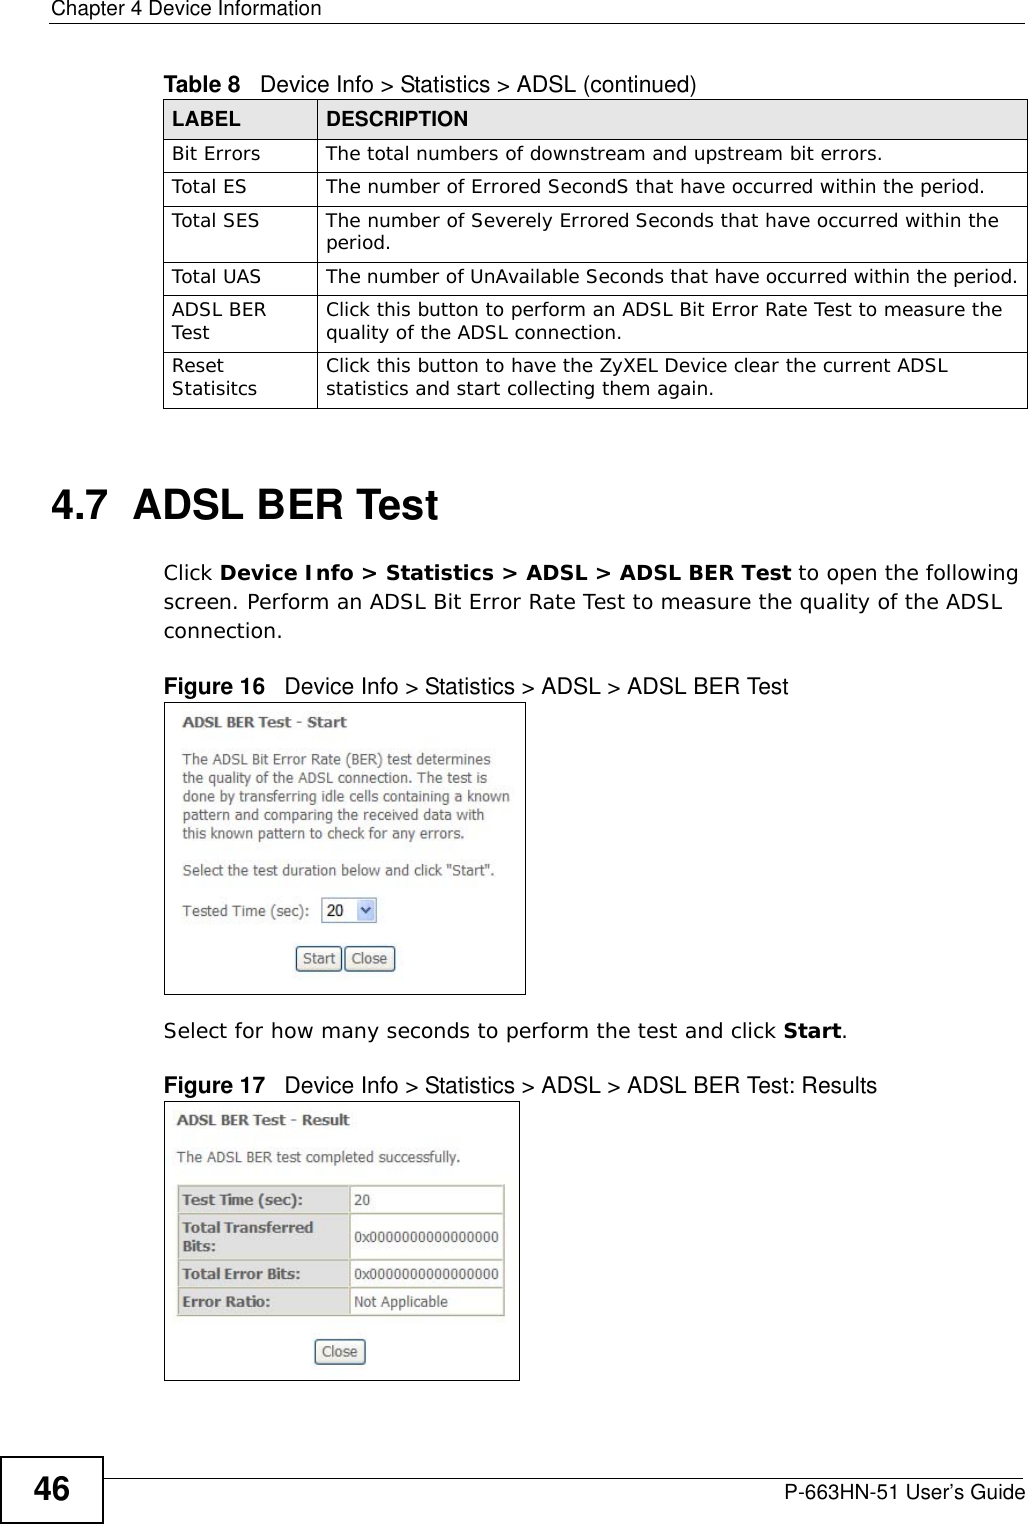 Chapter 4 Device InformationP-663HN-51 User’s Guide464.7  ADSL BER TestClick Device Info &gt; Statistics &gt; ADSL &gt; ADSL BER Test to open the following screen. Perform an ADSL Bit Error Rate Test to measure the quality of the ADSL connection.Figure 16   Device Info &gt; Statistics &gt; ADSL &gt; ADSL BER Test  Select for how many seconds to perform the test and click Start. Figure 17   Device Info &gt; Statistics &gt; ADSL &gt; ADSL BER Test: Results  Bit Errors The total numbers of downstream and upstream bit errors.Total ES The number of Errored SecondS that have occurred within the period.Total SES The number of Severely Errored Seconds that have occurred within the period.Total UAS The number of UnAvailable Seconds that have occurred within the period.ADSL BER Test Click this button to perform an ADSL Bit Error Rate Test to measure the quality of the ADSL connection.Reset Statisitcs Click this button to have the ZyXEL Device clear the current ADSL statistics and start collecting them again.Table 8   Device Info &gt; Statistics &gt; ADSL (continued)LABEL  DESCRIPTION